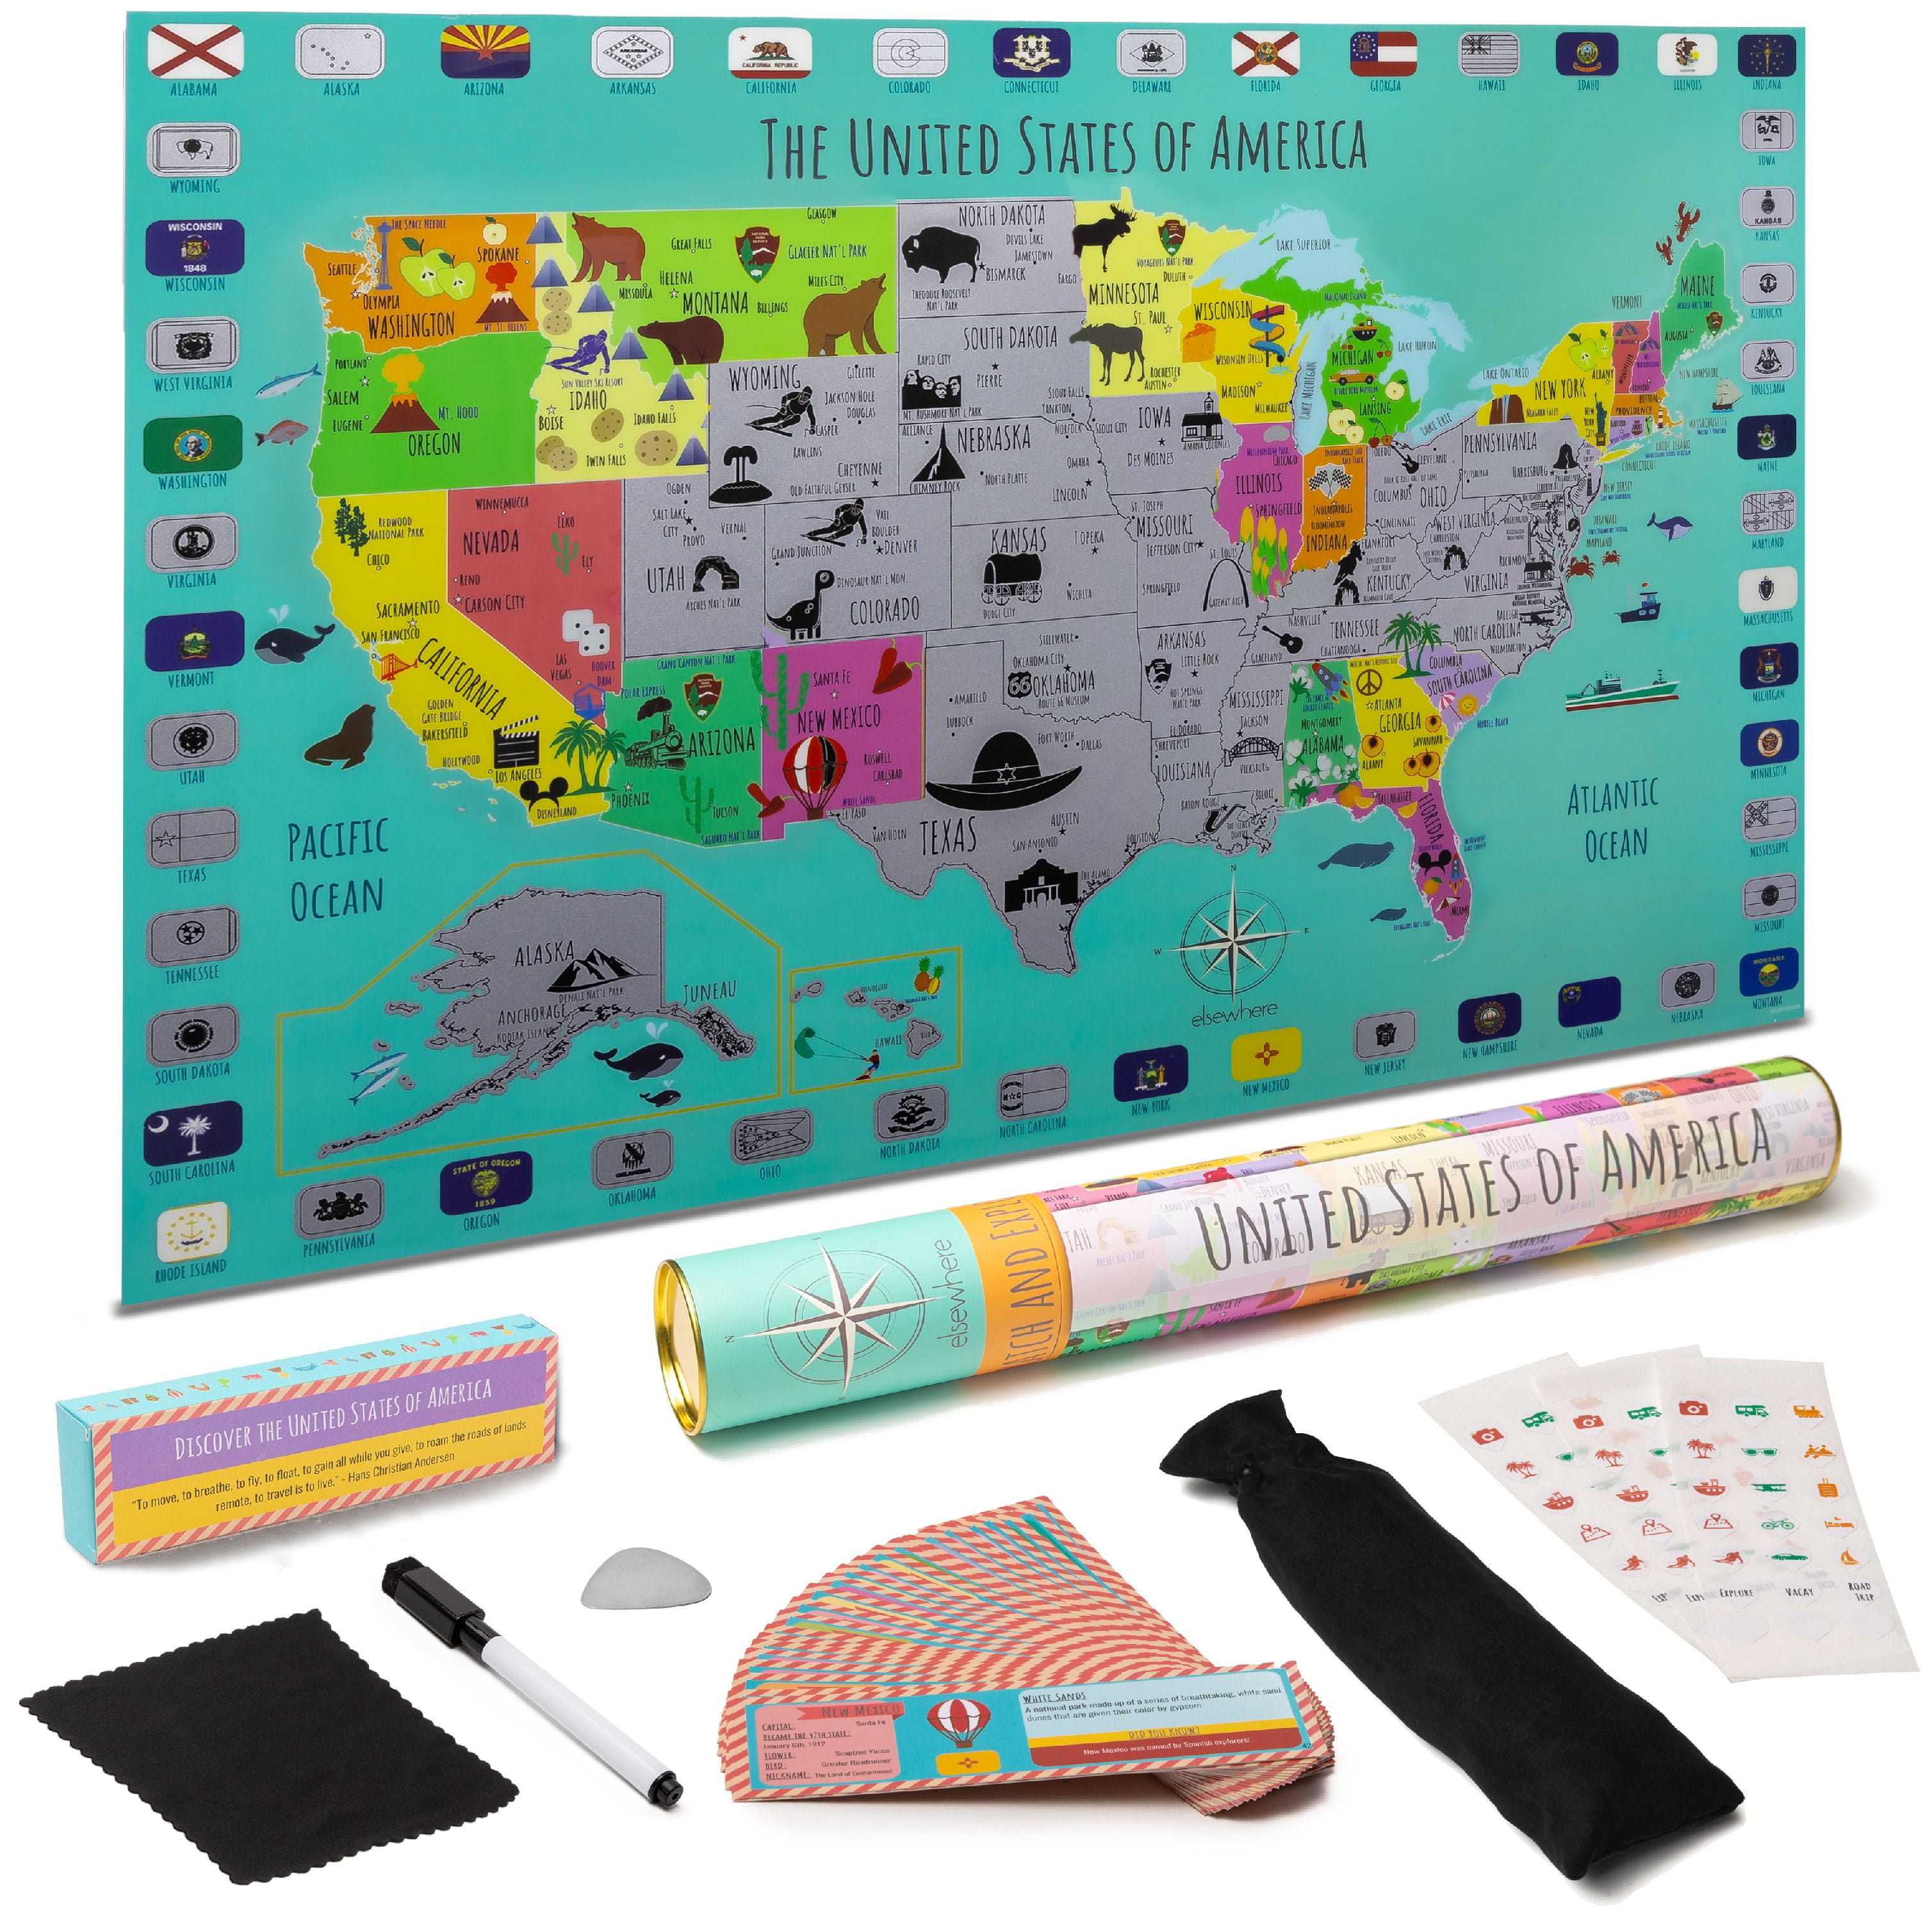 Fun United States Travel Map Poster Gift Premium Scratch Off USA Map for Travelers Scratch Off United States Map with US National Parks & 50 USA Landmarks Includes Full Accessories Set & eBook 